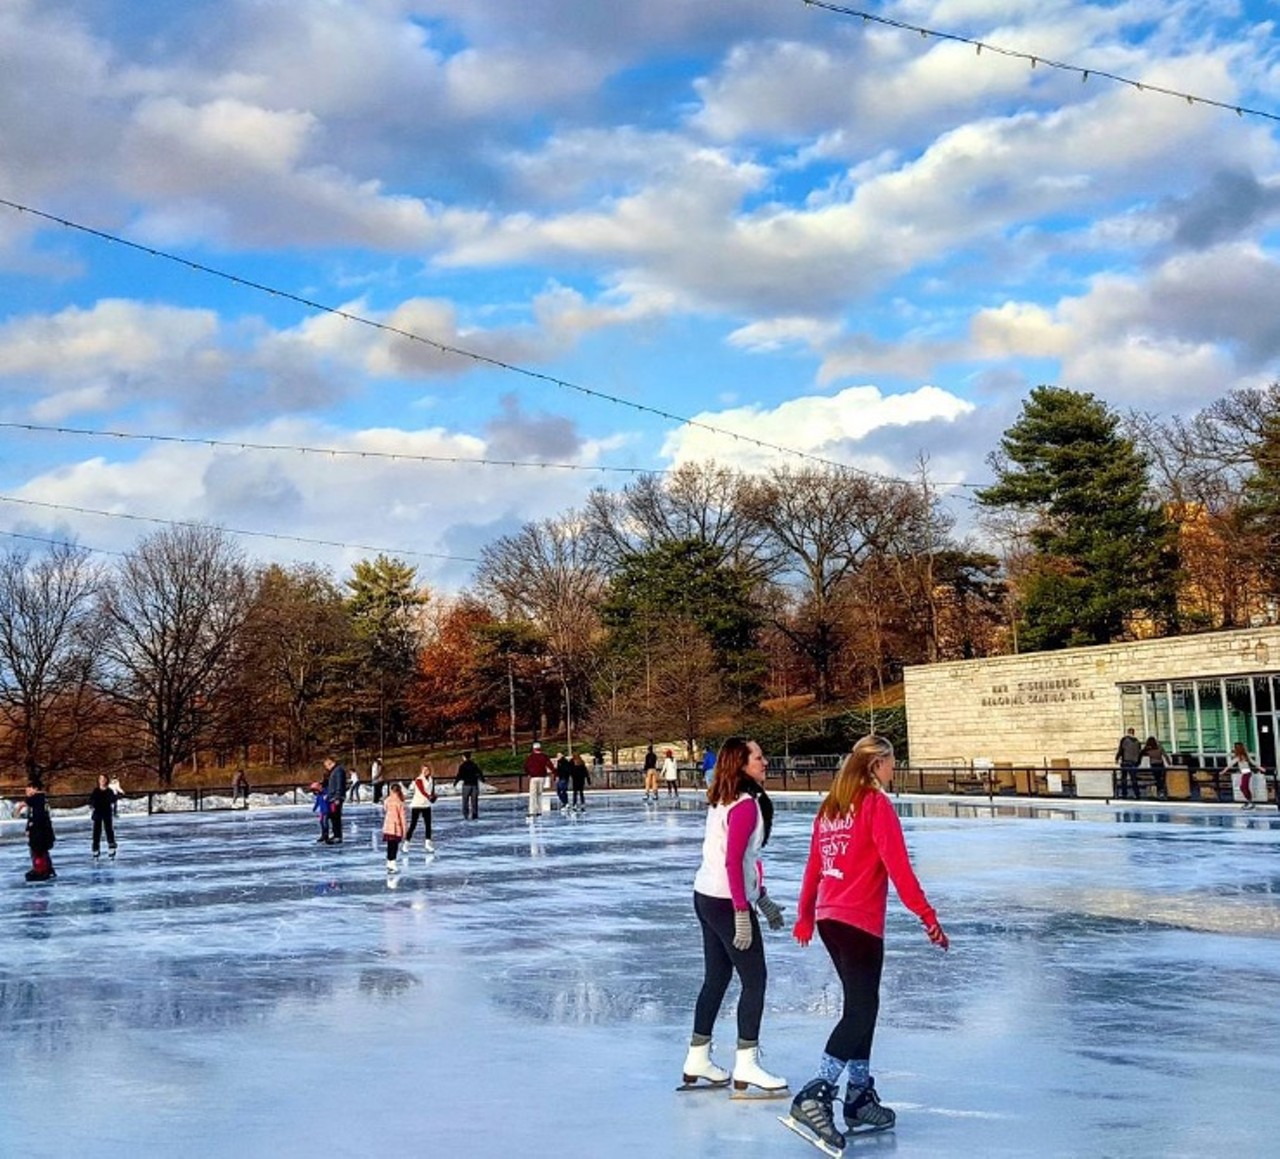 Go ice skating -- all over the city.
Steinberg Ice Rink in Forest Park is a true winter staple and not to be missed -- but St. Louis also has other rinks you may not have visited yet, including rinks at Anheuser-Busch Brewery and the Gateway Arch. With all these options, there's no excuse not to get your winter workout in -- and have fun (or at least work on your coordination) while you're at it. Photo courtesy of Instagram / vikingpunkology.